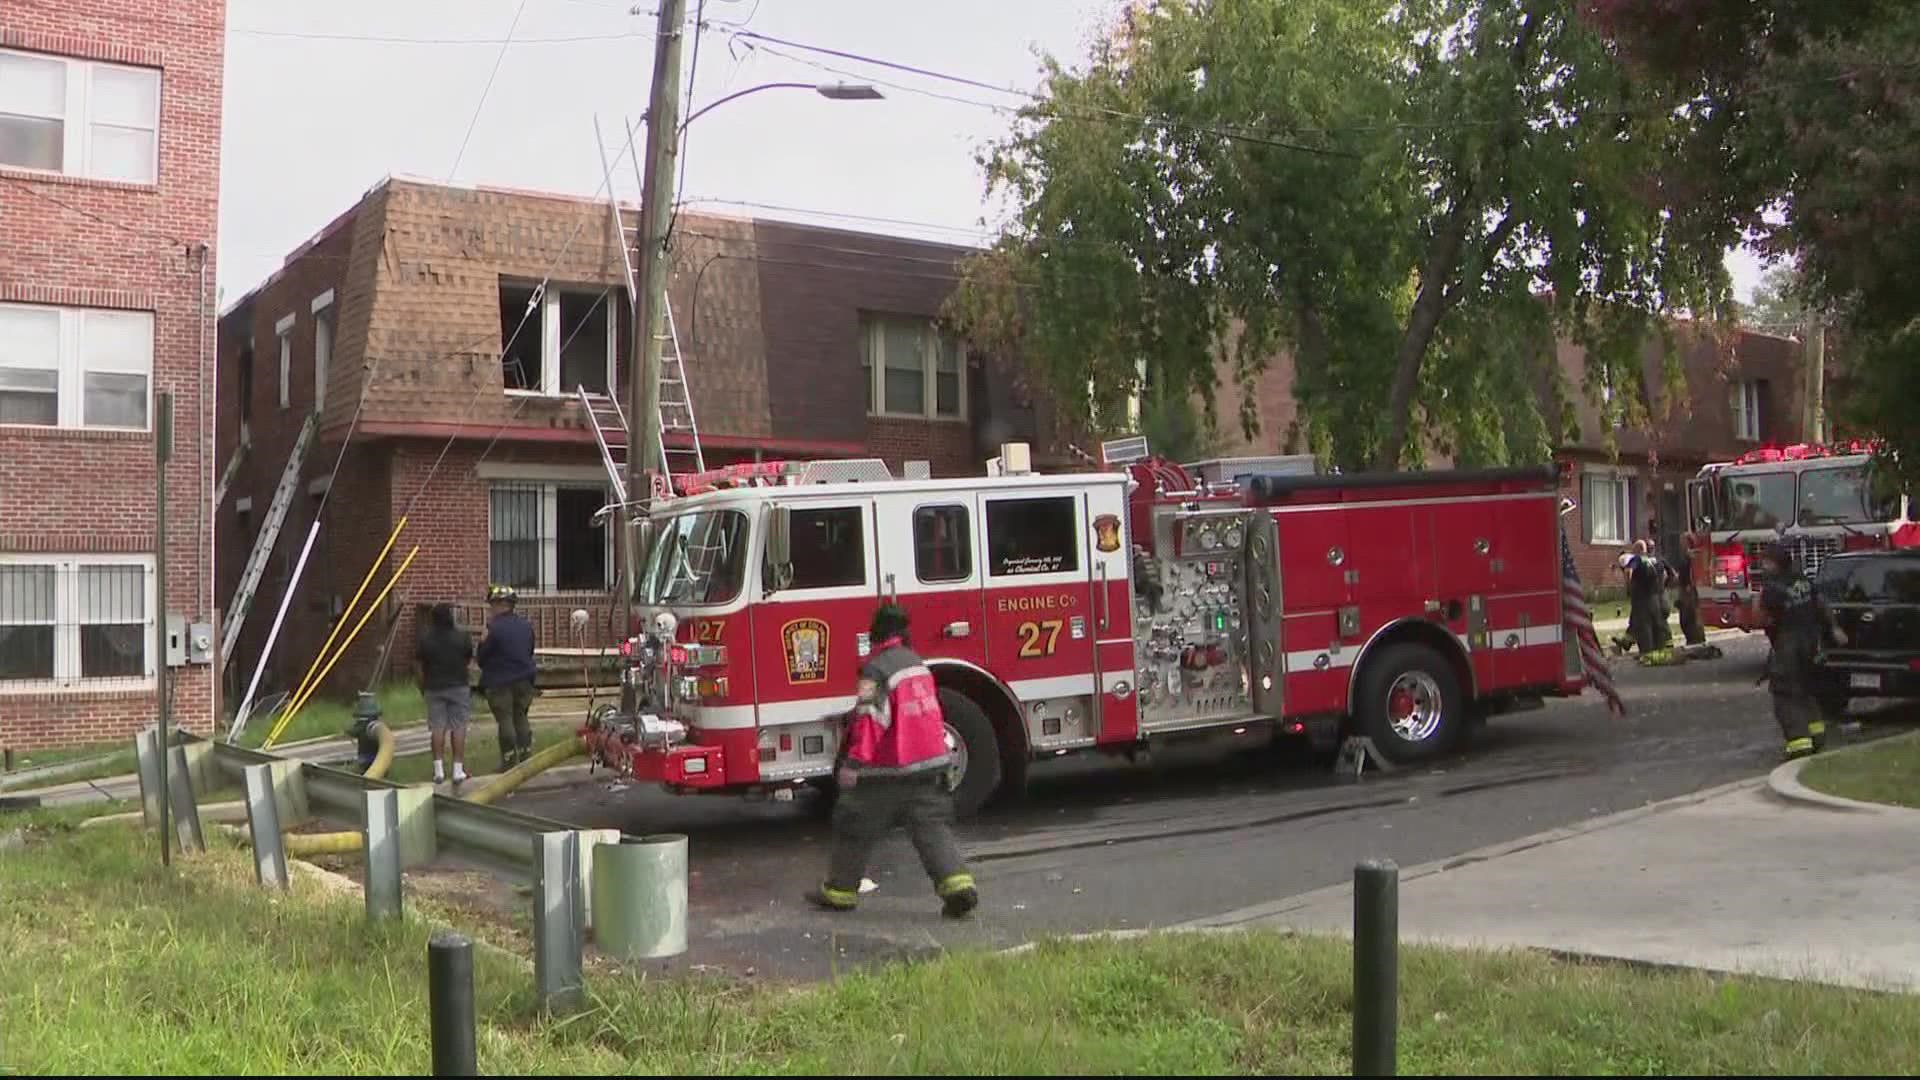 Firefighters are on the scene of a house fire in Southeast D.C. that has displaced 13 people, including 11 children.